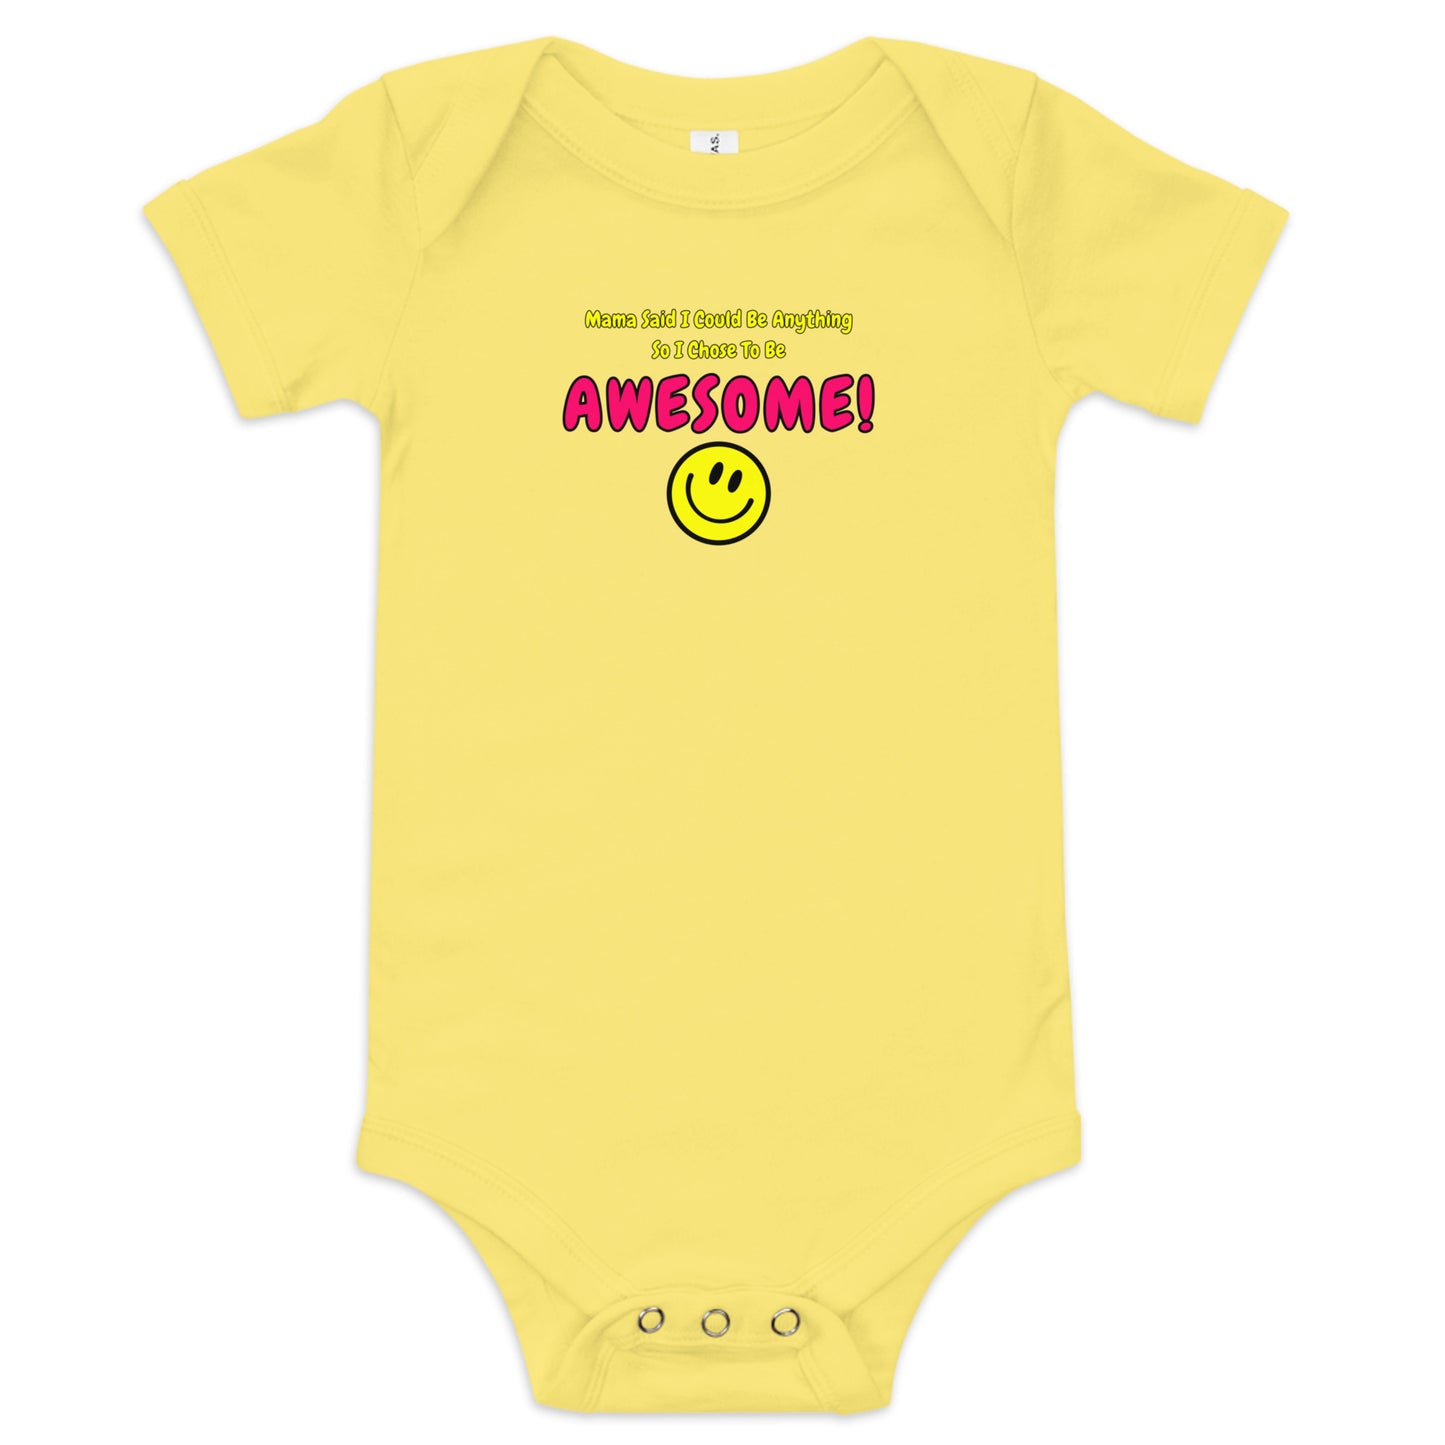 Mama Said I Could Be Anything So I Chose To Be AWESOME! Baby short sleeve one piece